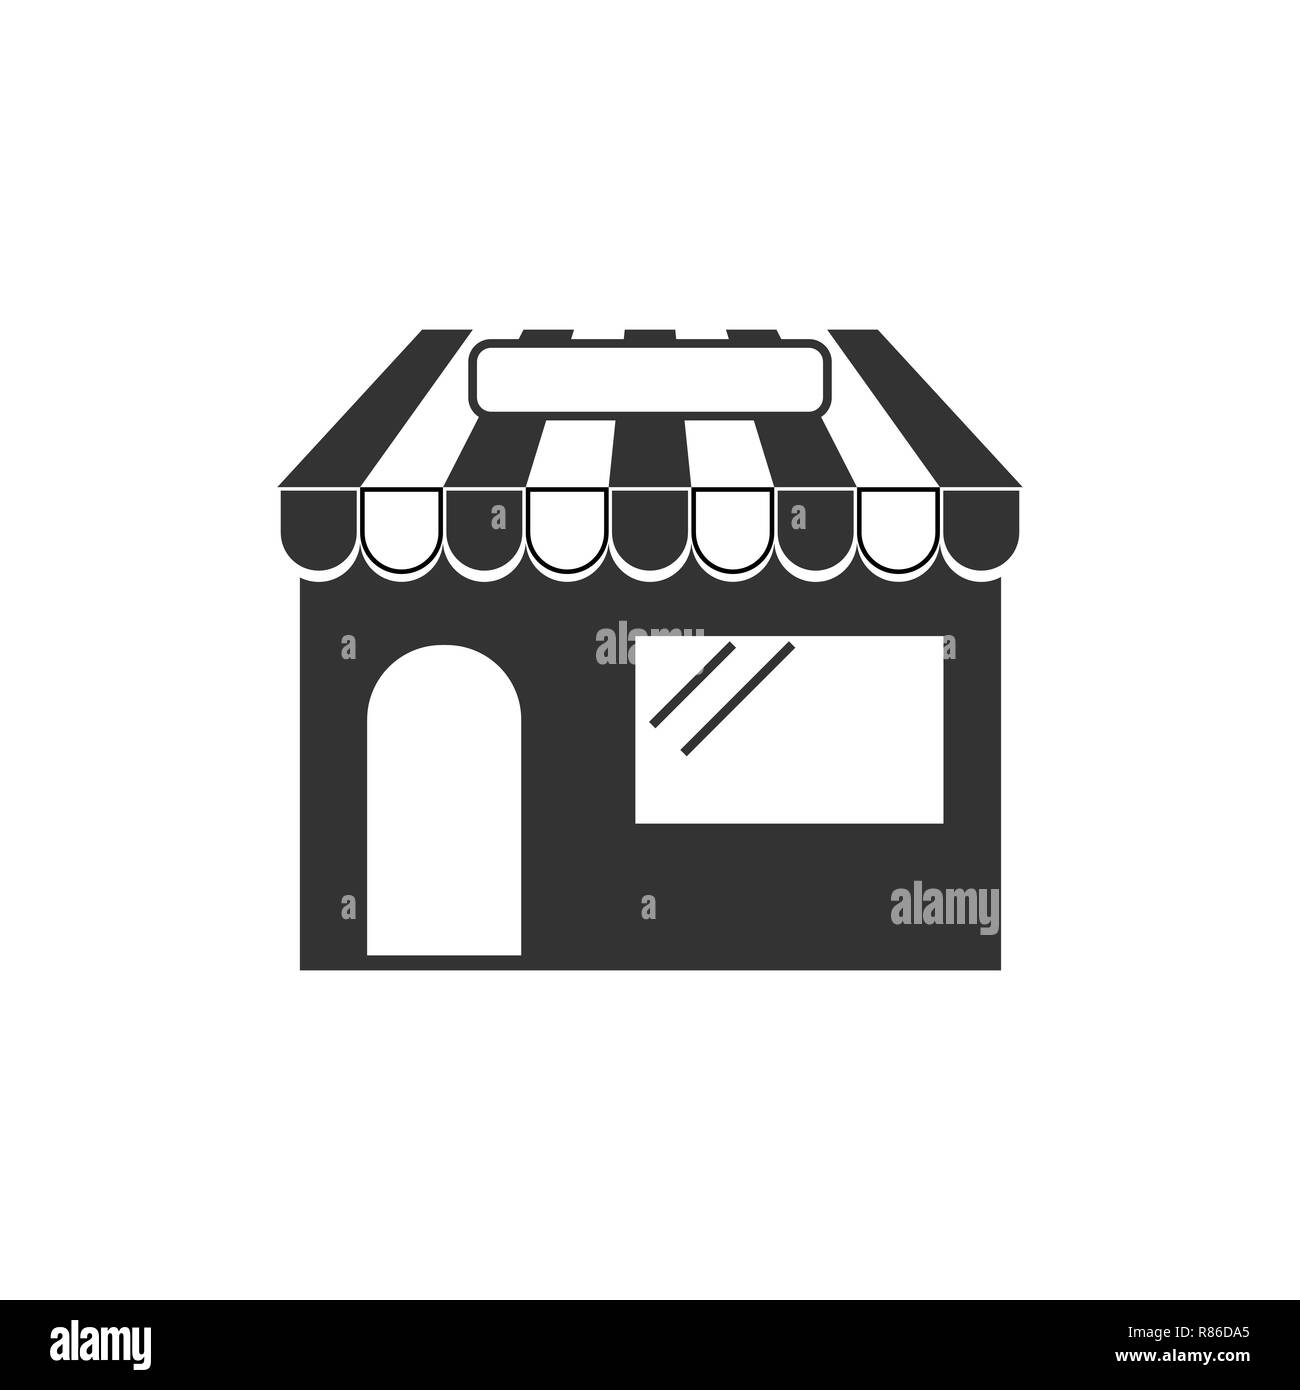 Commerce, shop, store icon. Vector illustration. Building Stock Vector